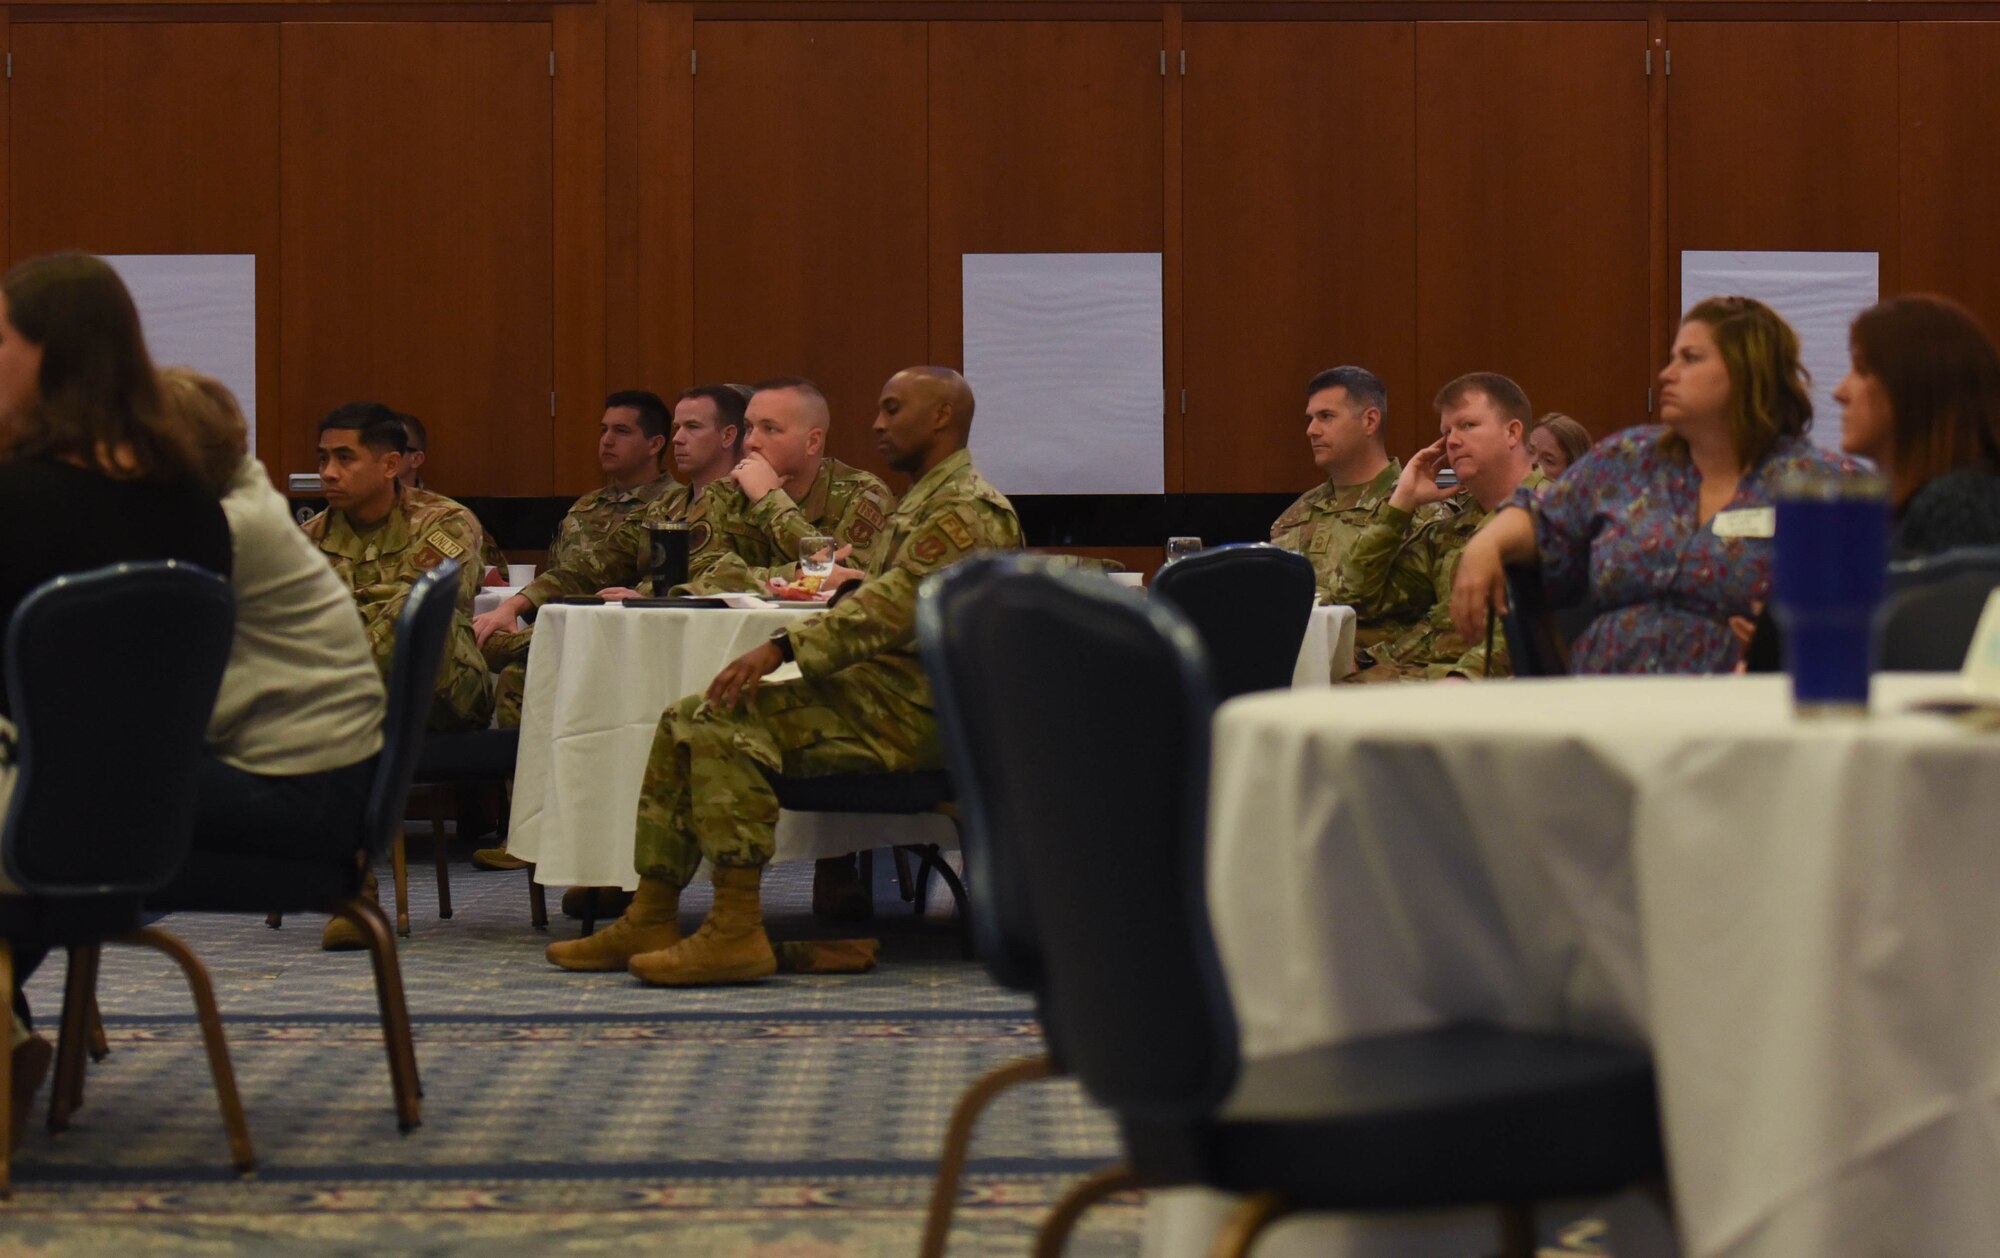 Attendees listen to guest speakers during the Key Spouse Symposium, May 25th, 2022, on Spangdahlem Air Base, Germany. Guests were further educated about Spangdahlem and the Key Spouse Program.
(U.S. Air Force photo by Airman 1st Class Imani West)